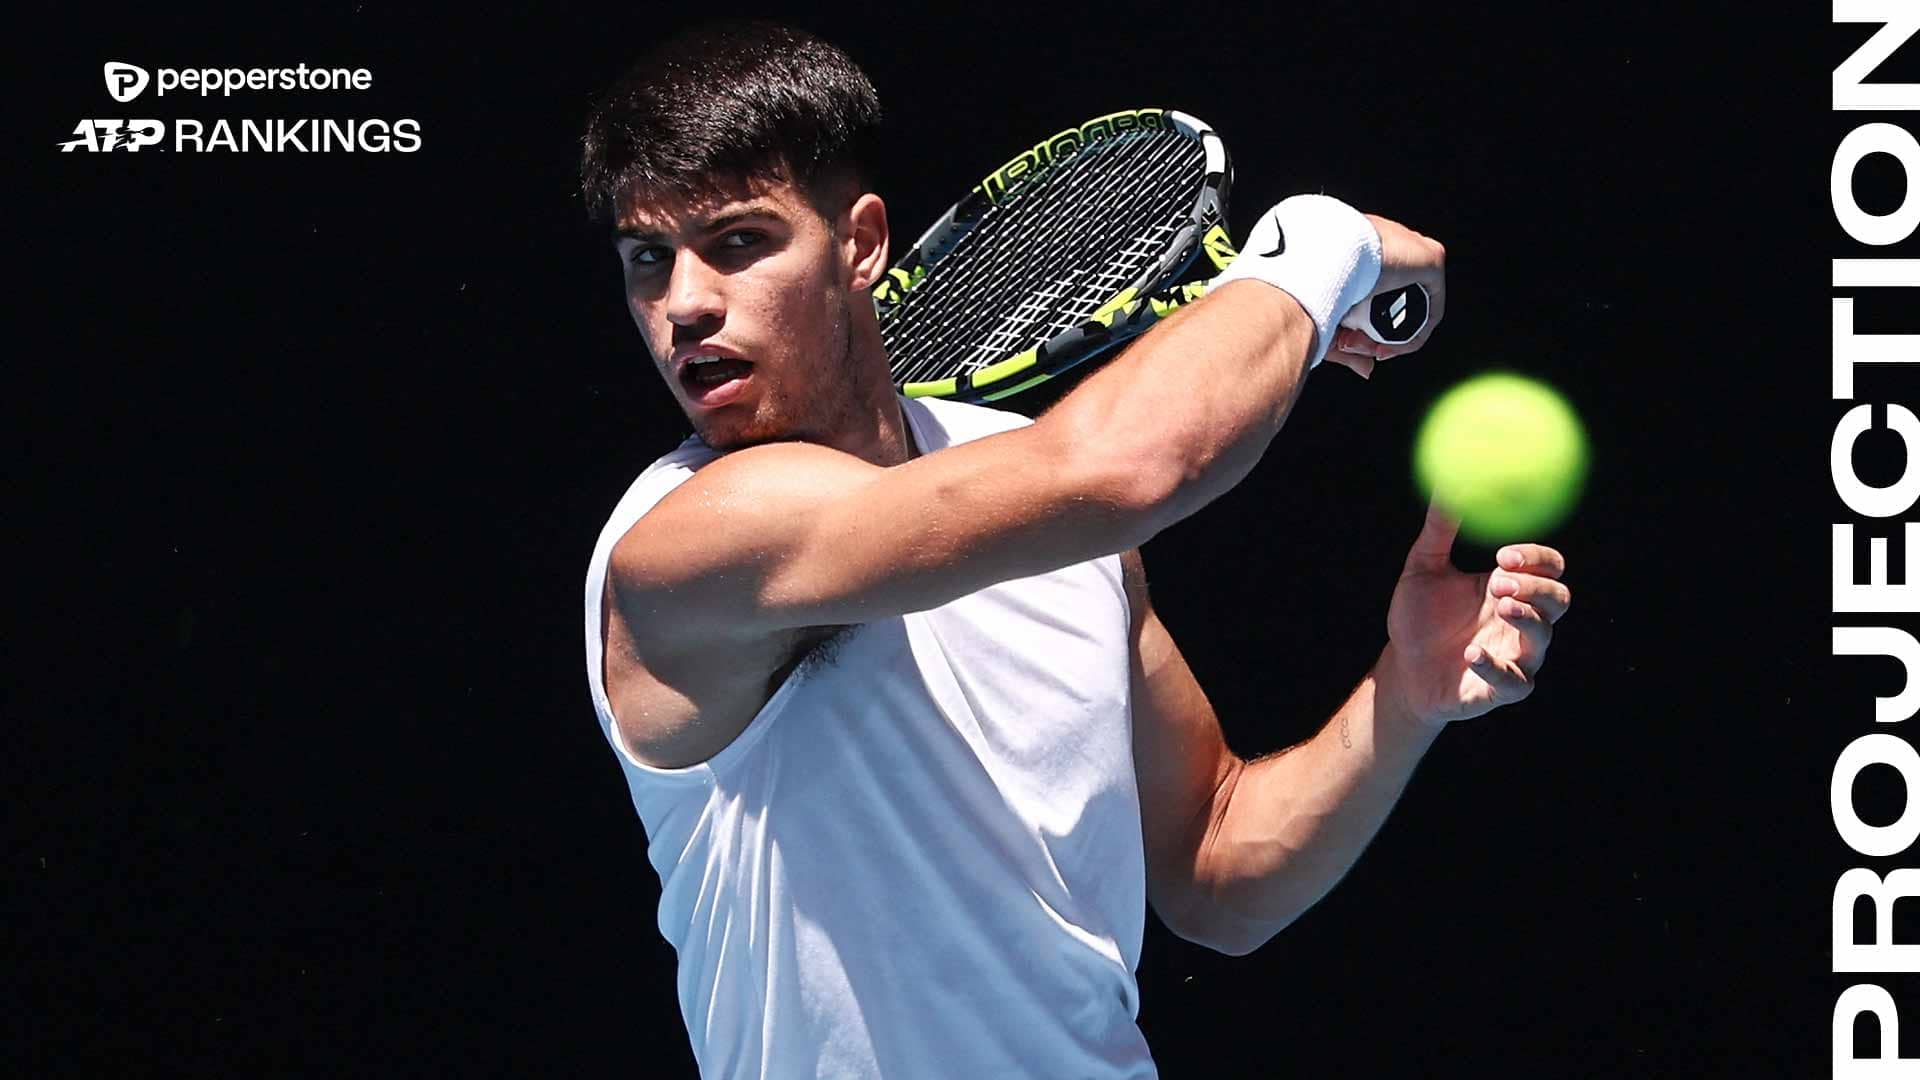 Carlos Alcaraz will return to World No. 1 with a title at the Australian Open.